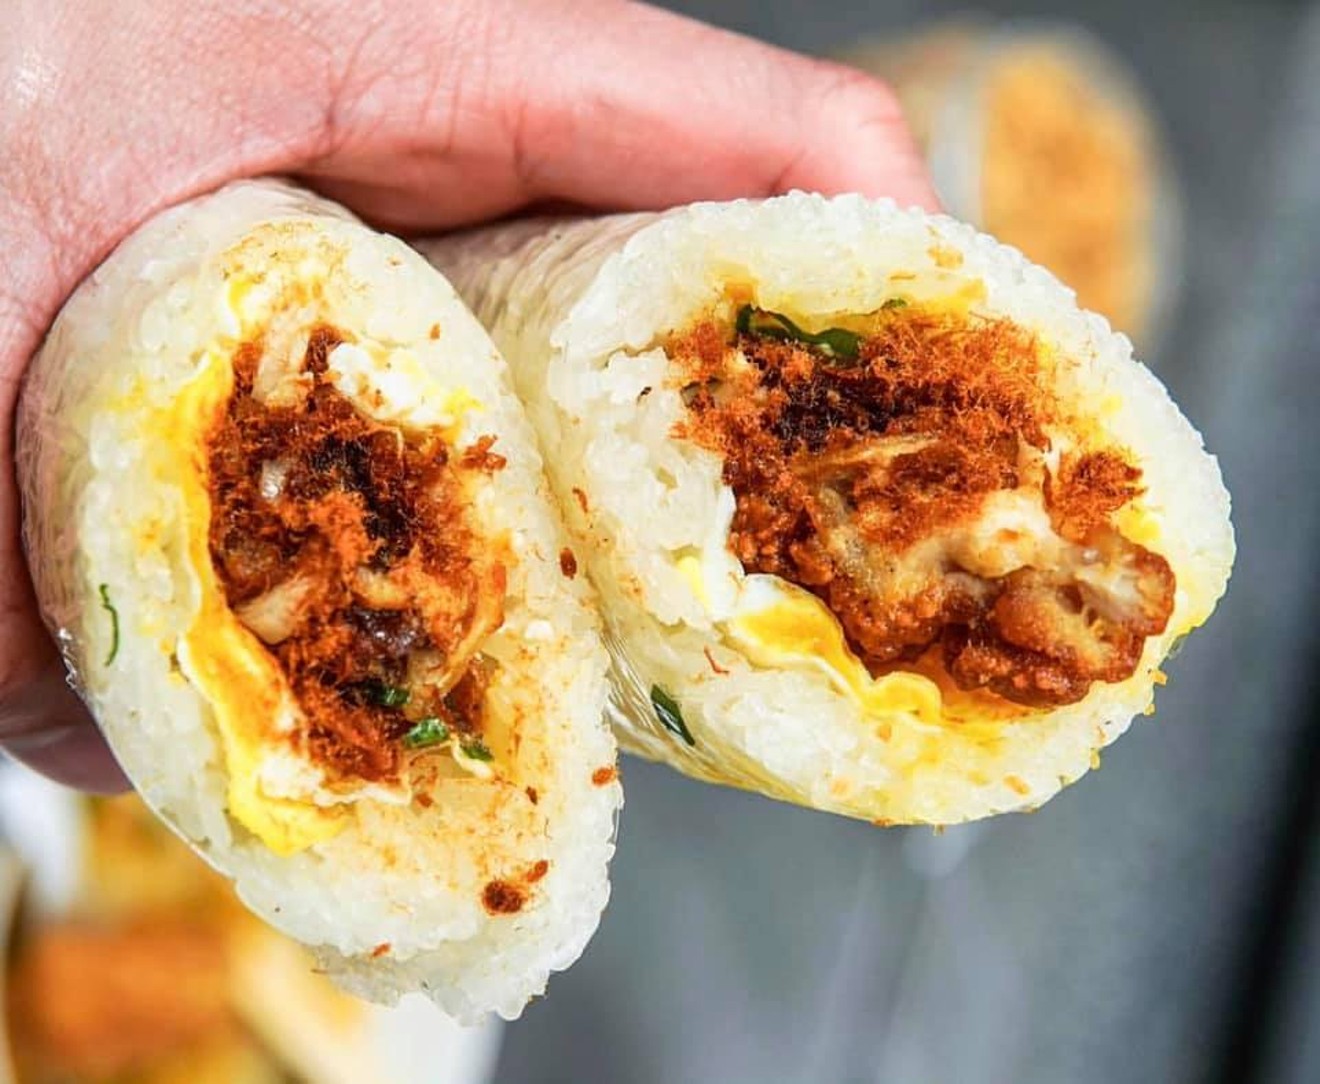 Sticky rice burritos will be in Deep Ellum this weekend.